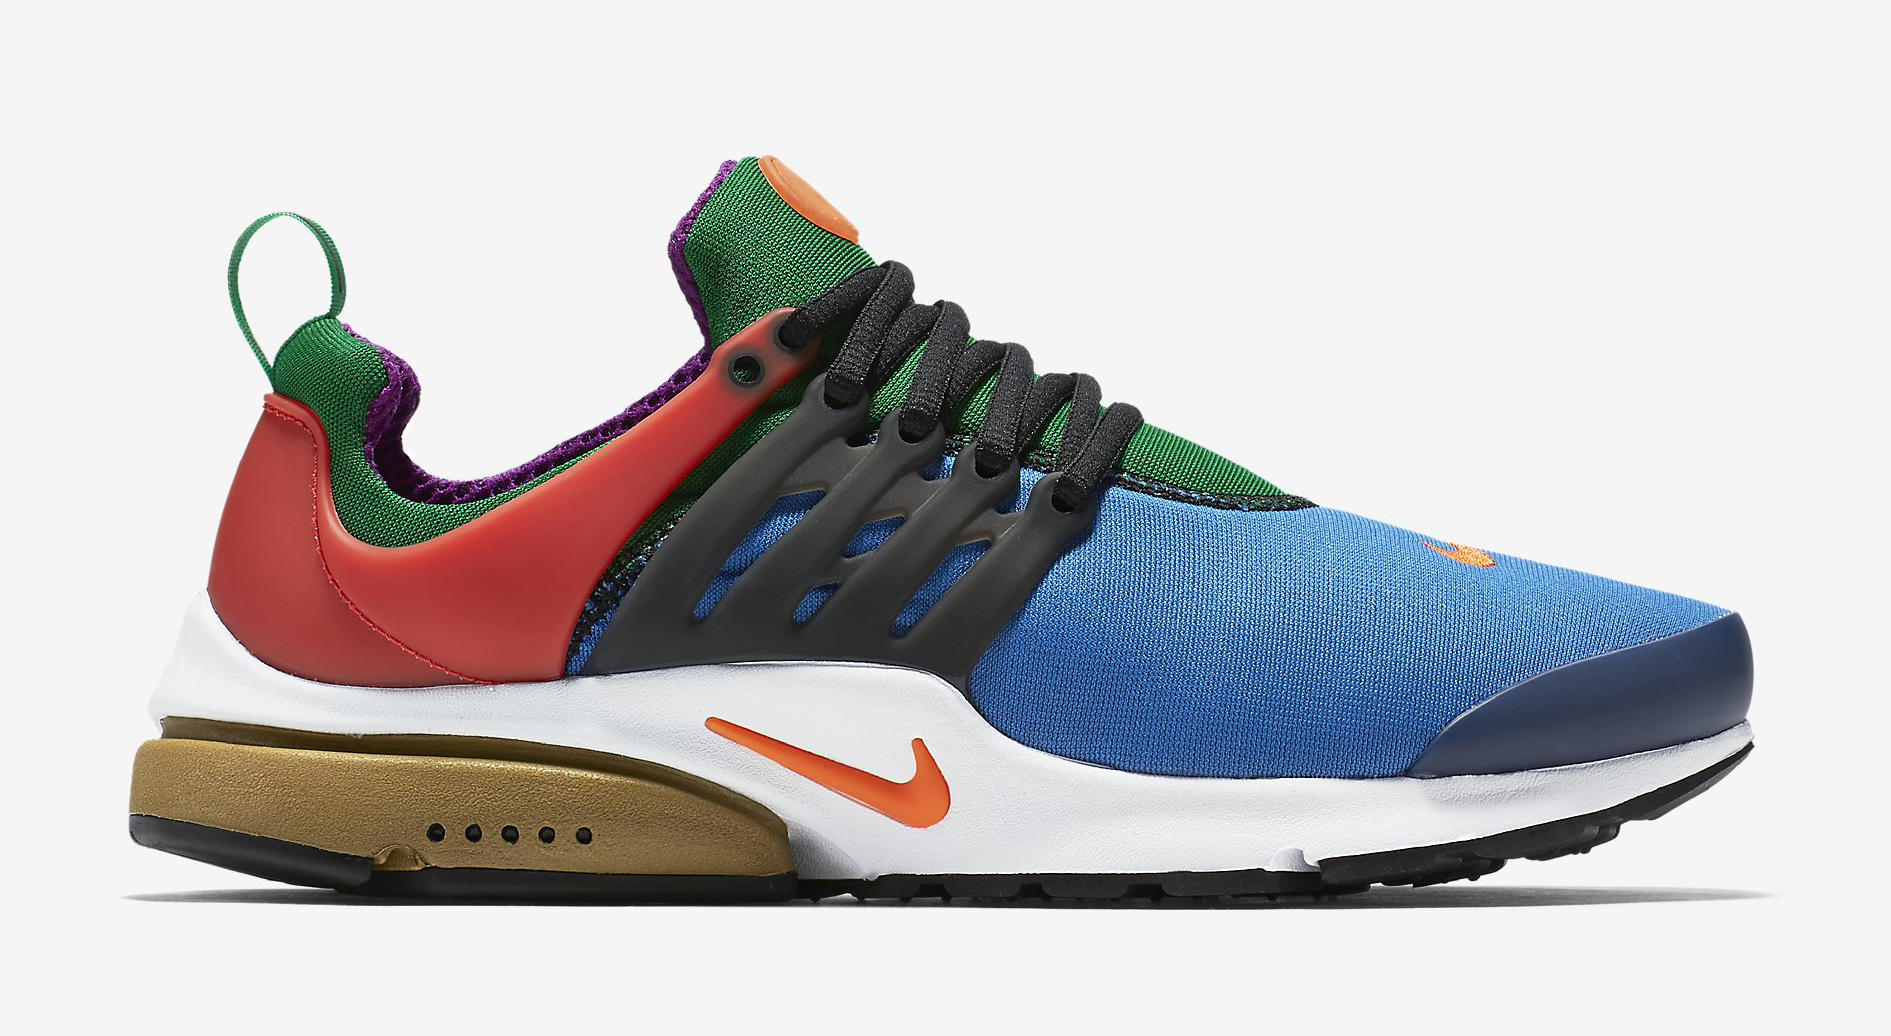 Colorful Nike Air Presto Is Coming |